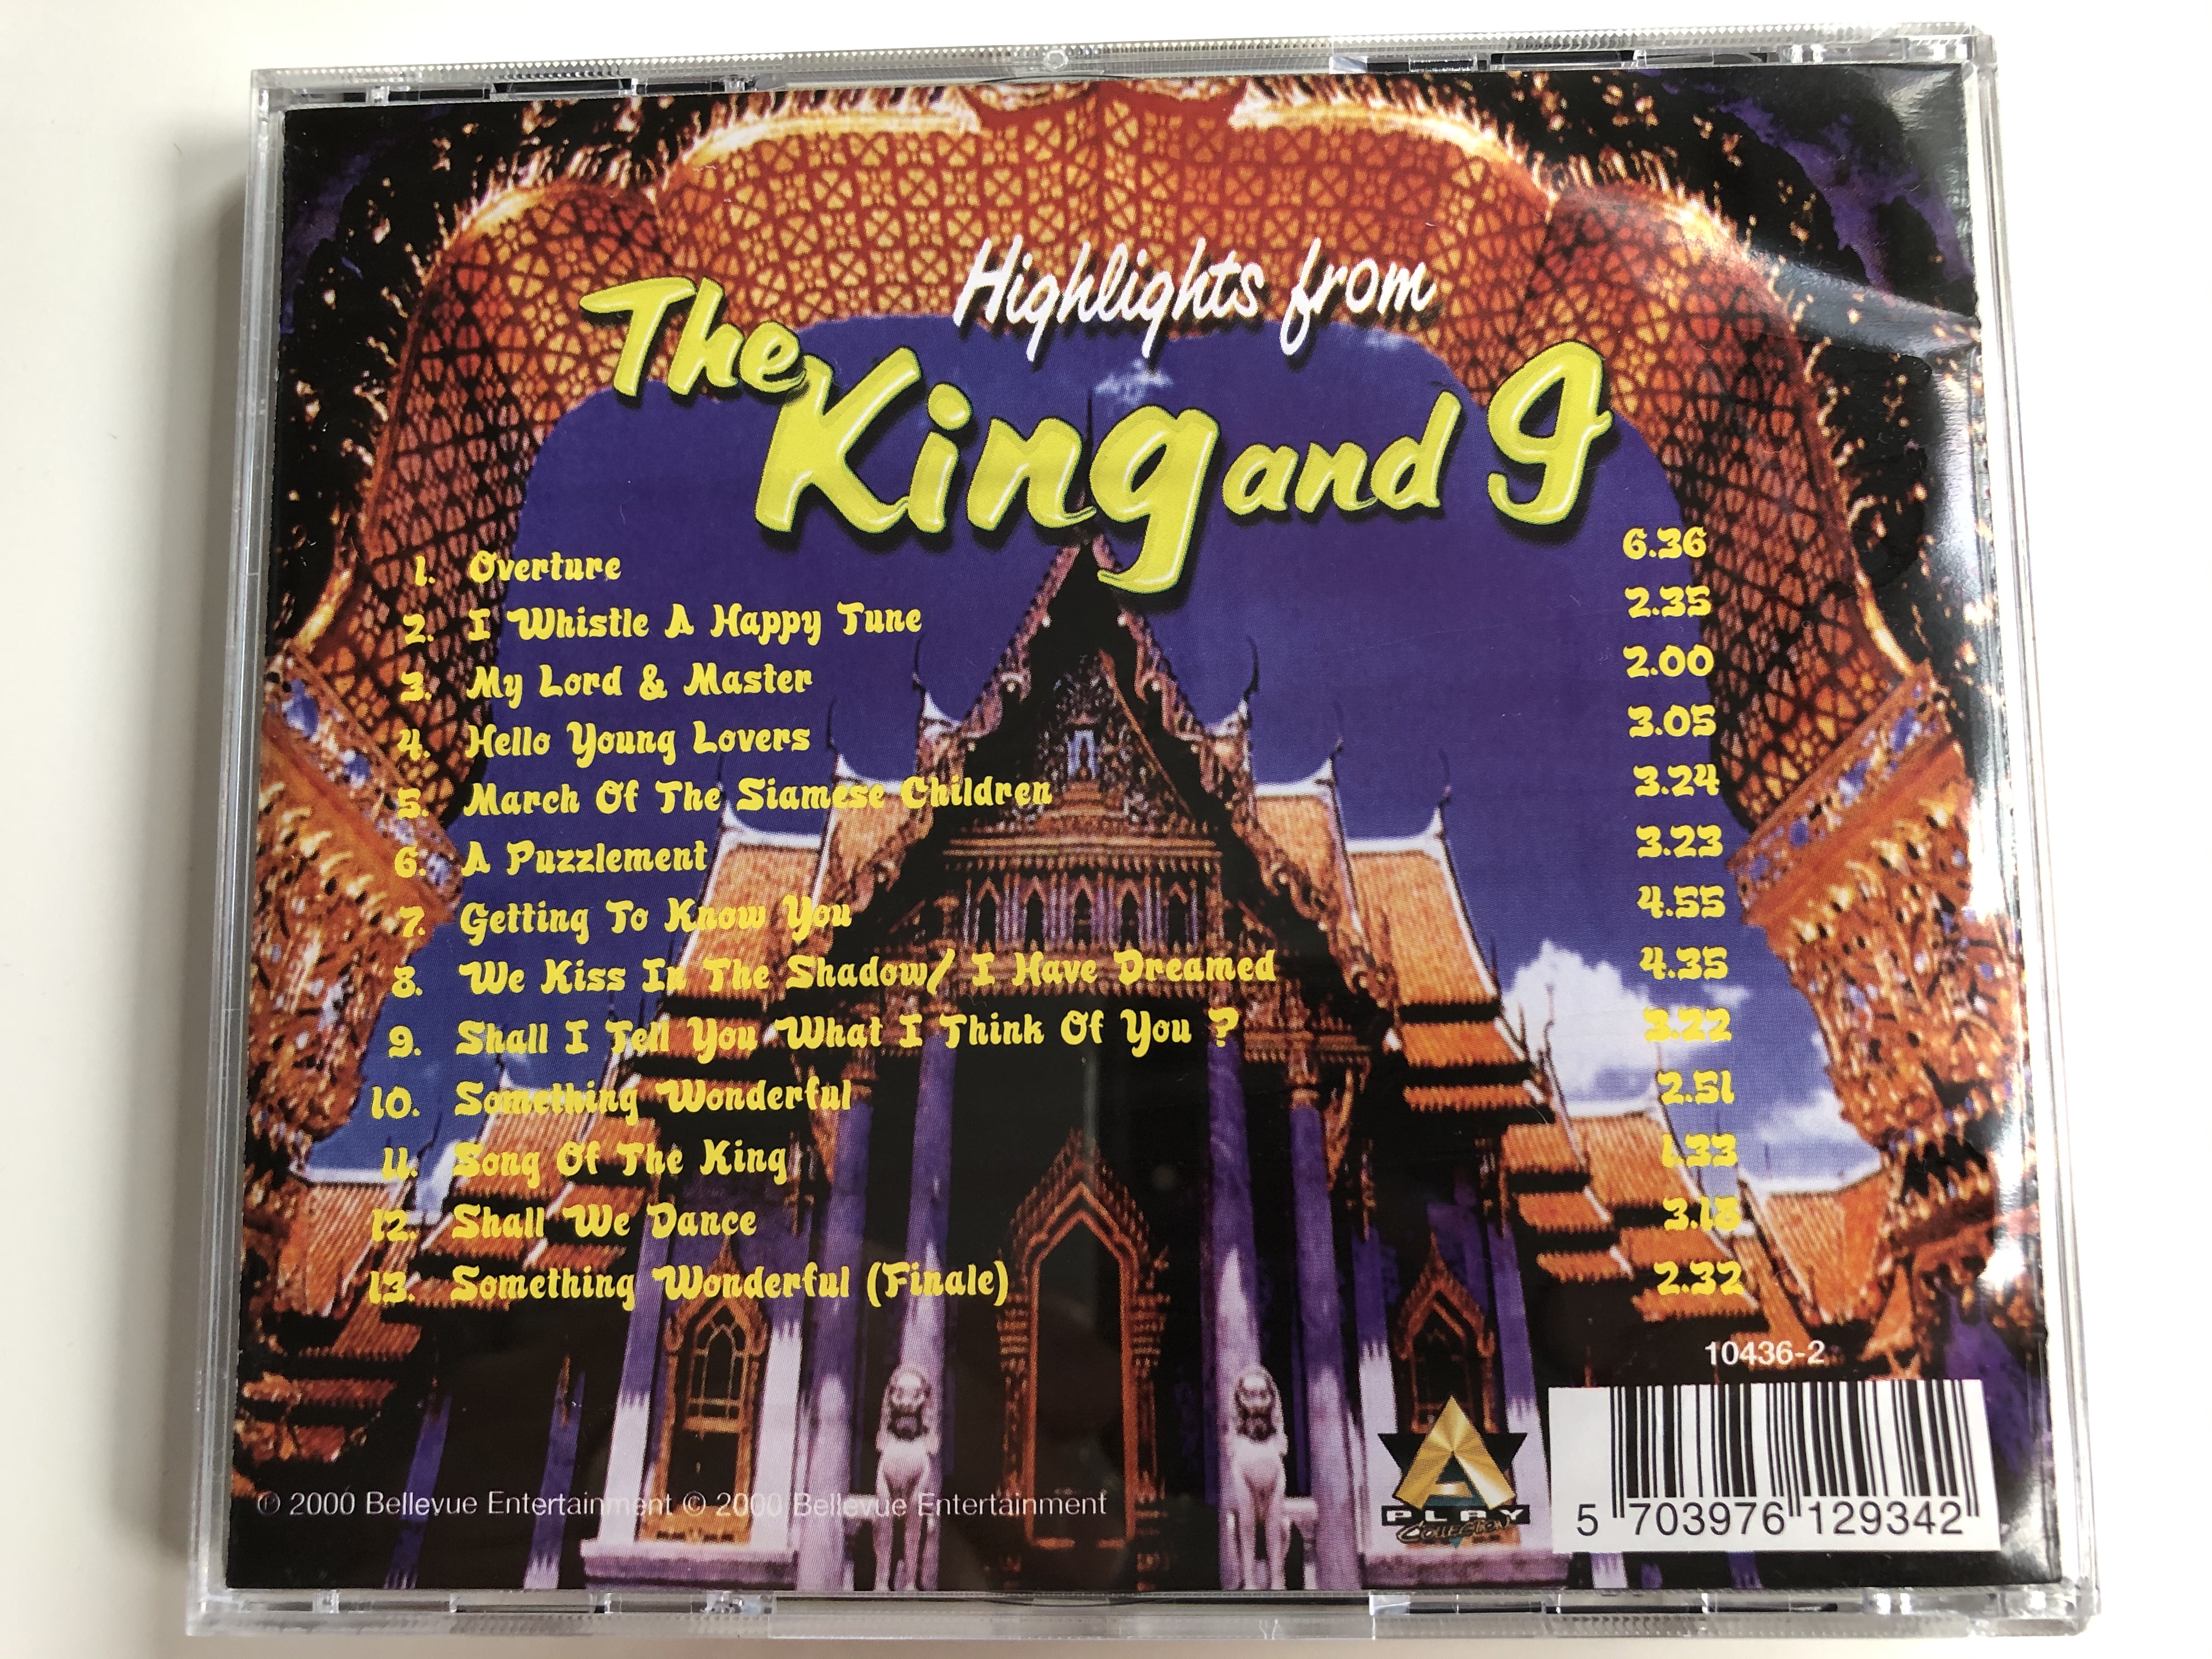 highlights-from-the-king-and-i-performed-by-the-west-end-players-and-singers-featuring-hello-young-lovers-getting-to-know-you-shall-we-dance-and-many-more...-bellevue-audio-cd-2000-104-4-.jpg